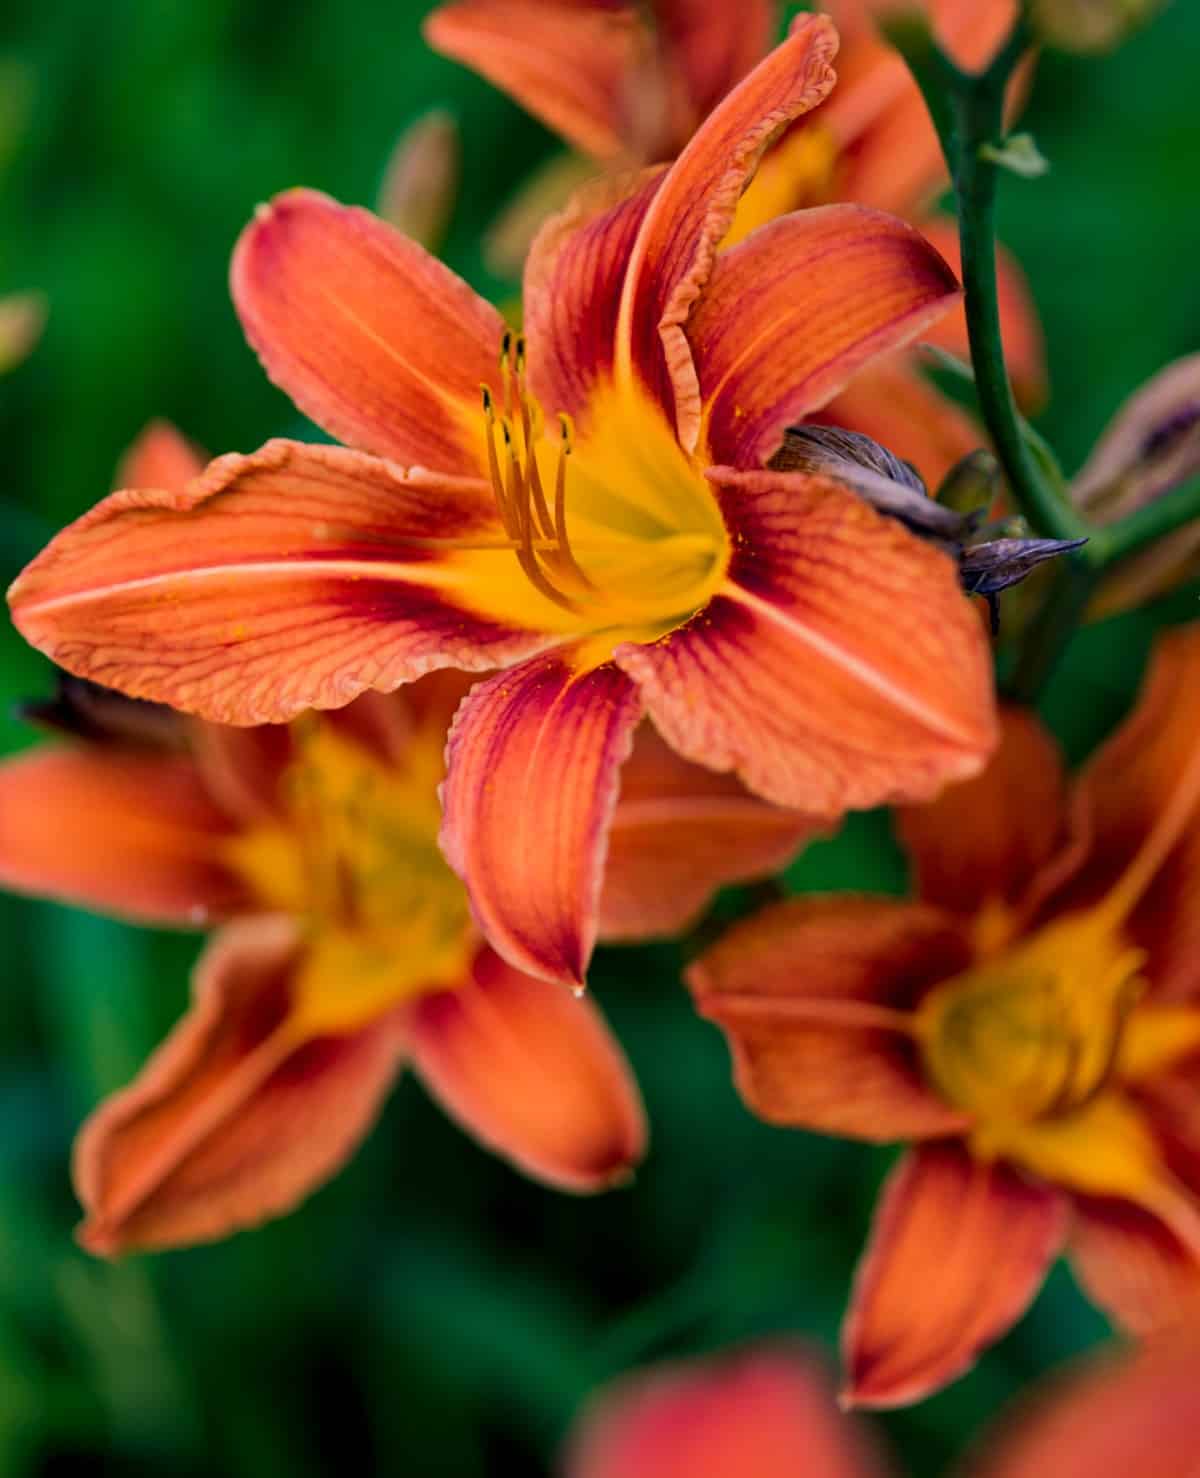 daylilies are easily grown and are low-maintenance